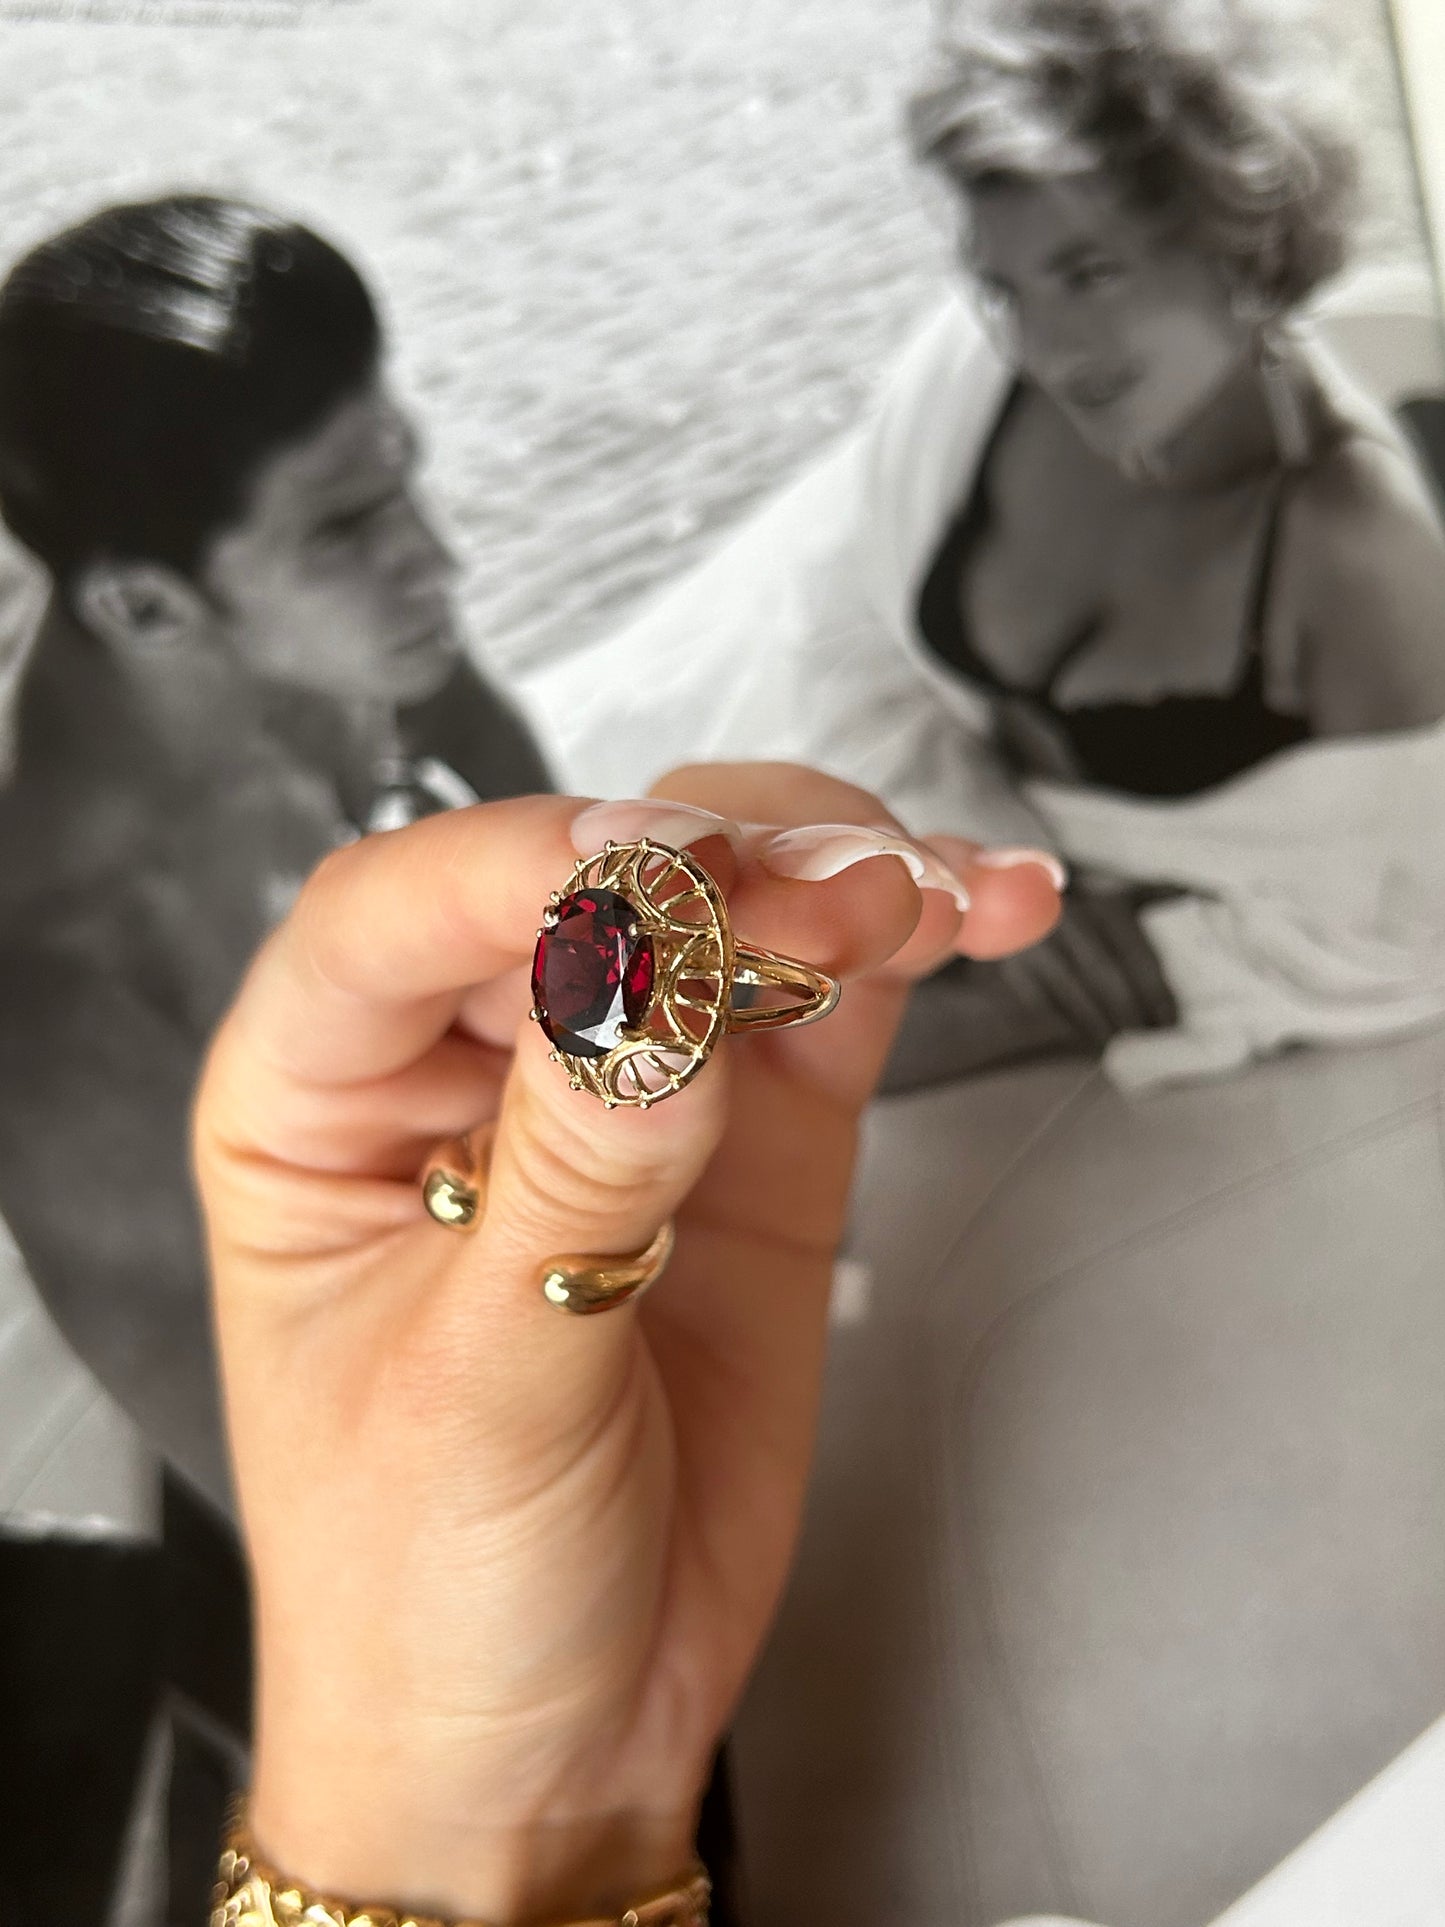 9ct Yellow Gold Oval Cut Red Garnet Ring